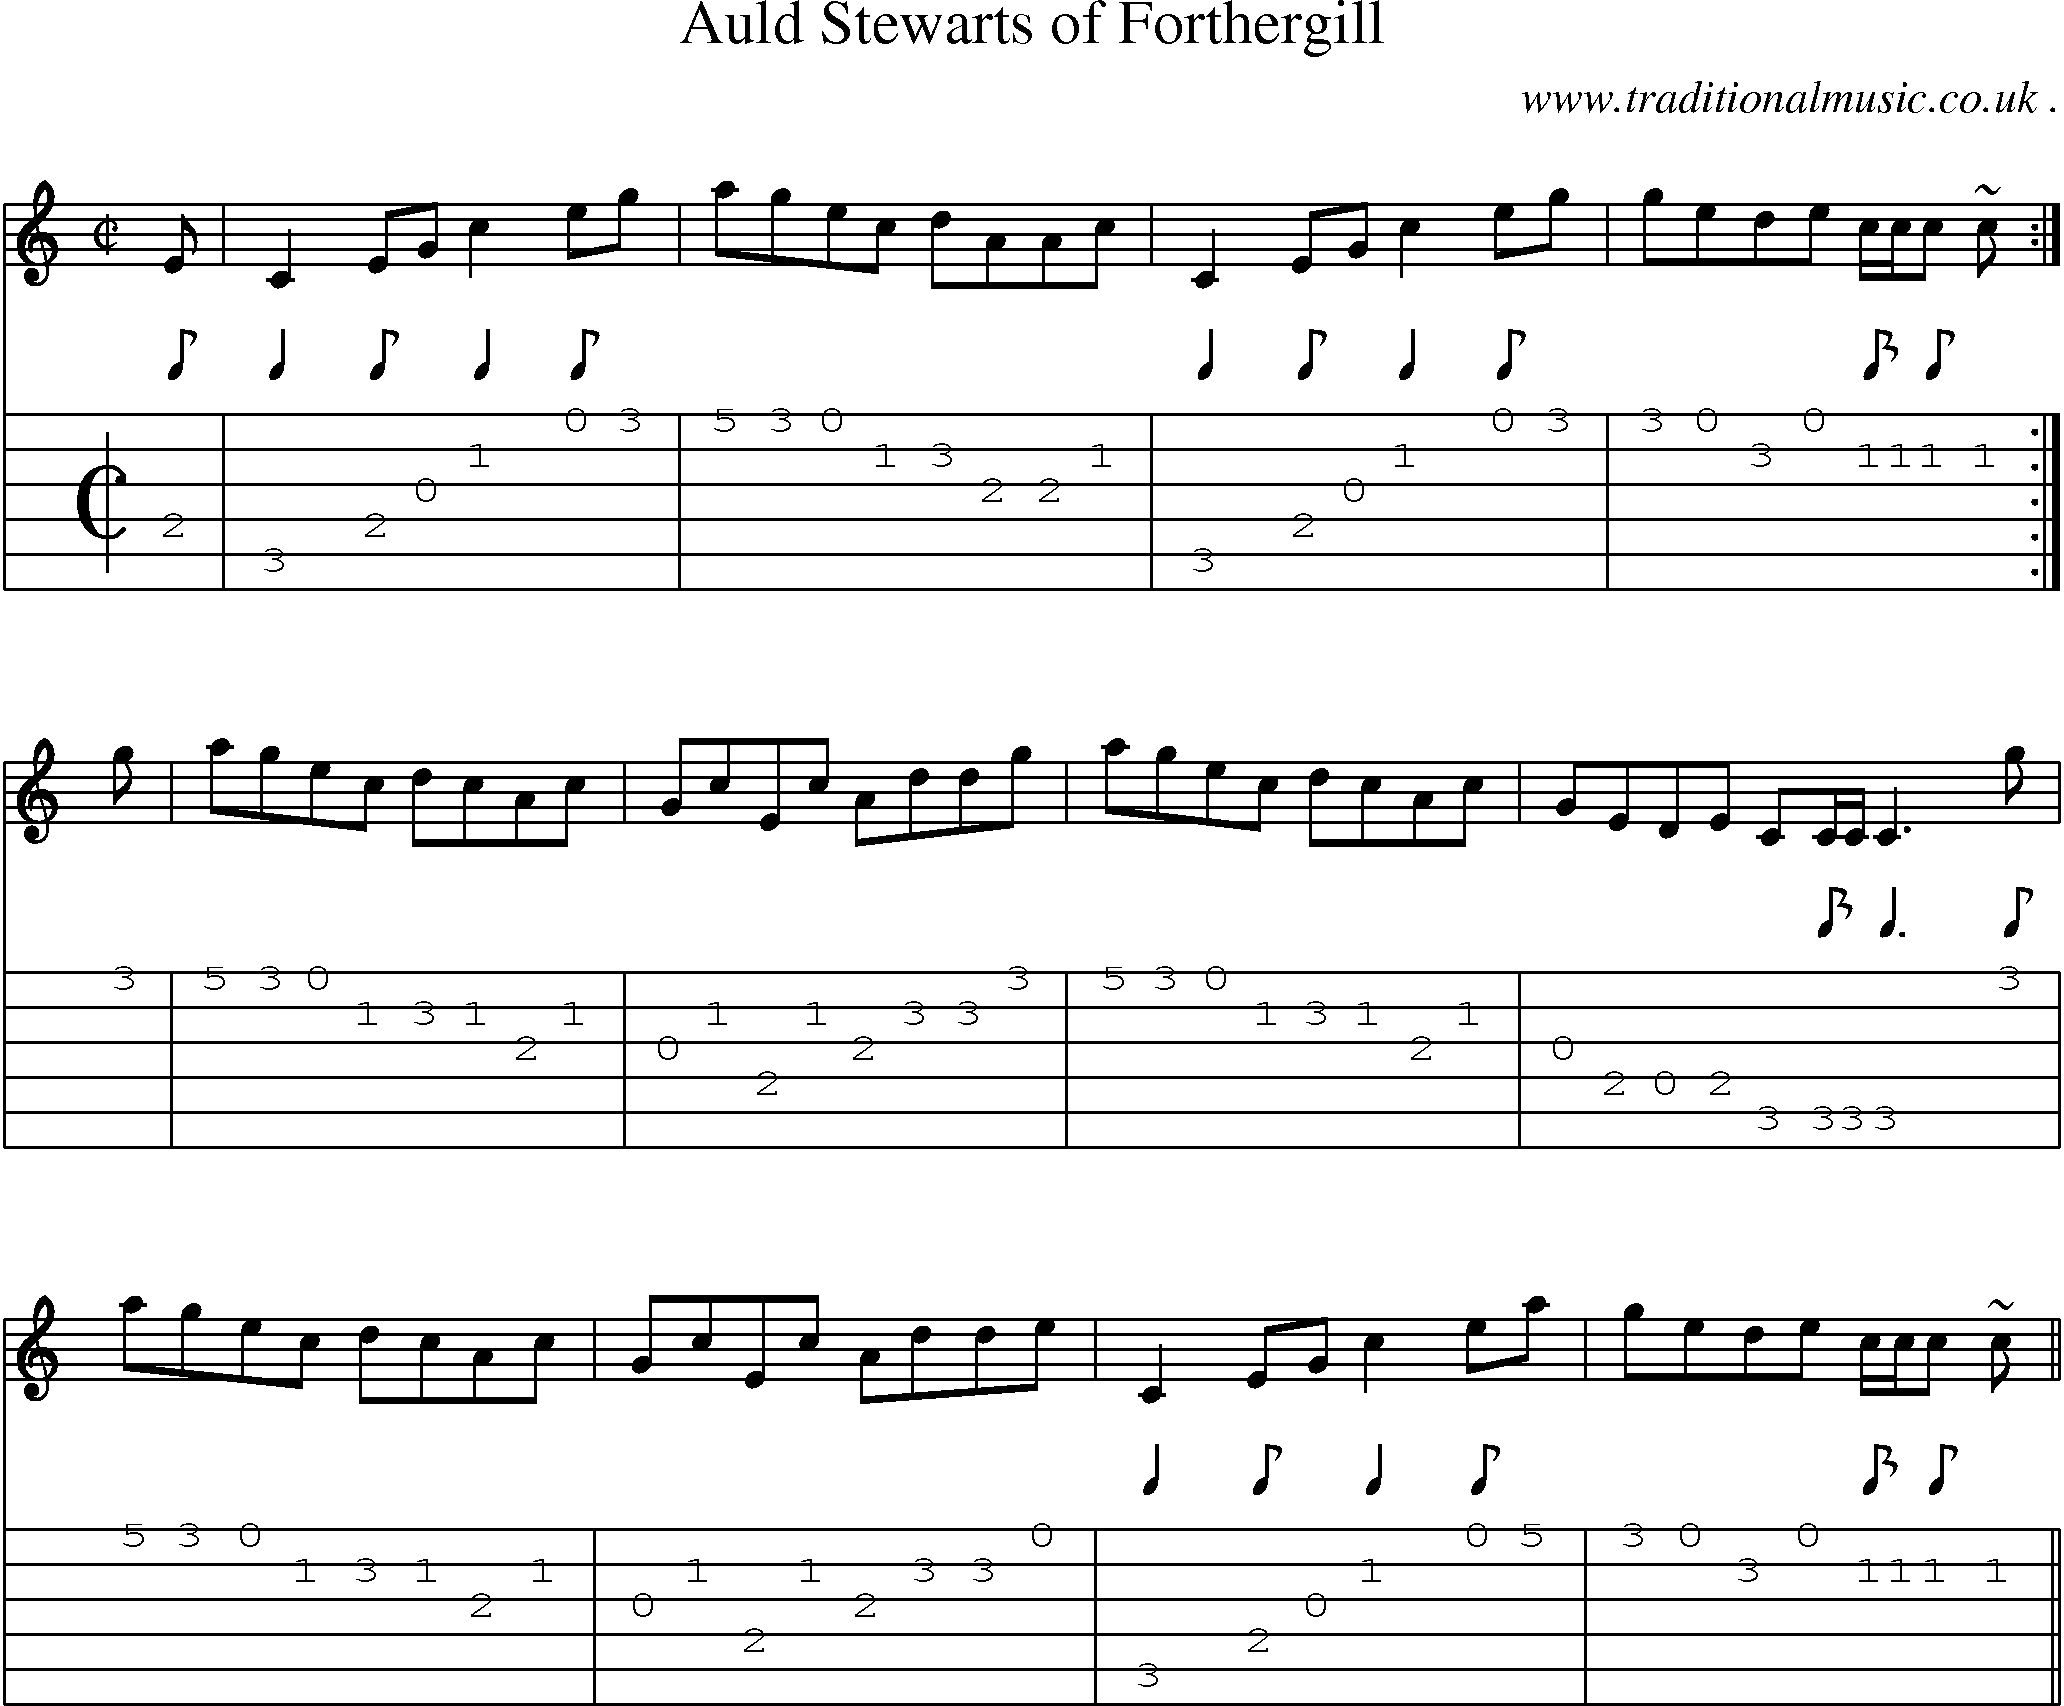 Sheet-music  score, Chords and Guitar Tabs for Auld Stewarts Of Forthergill